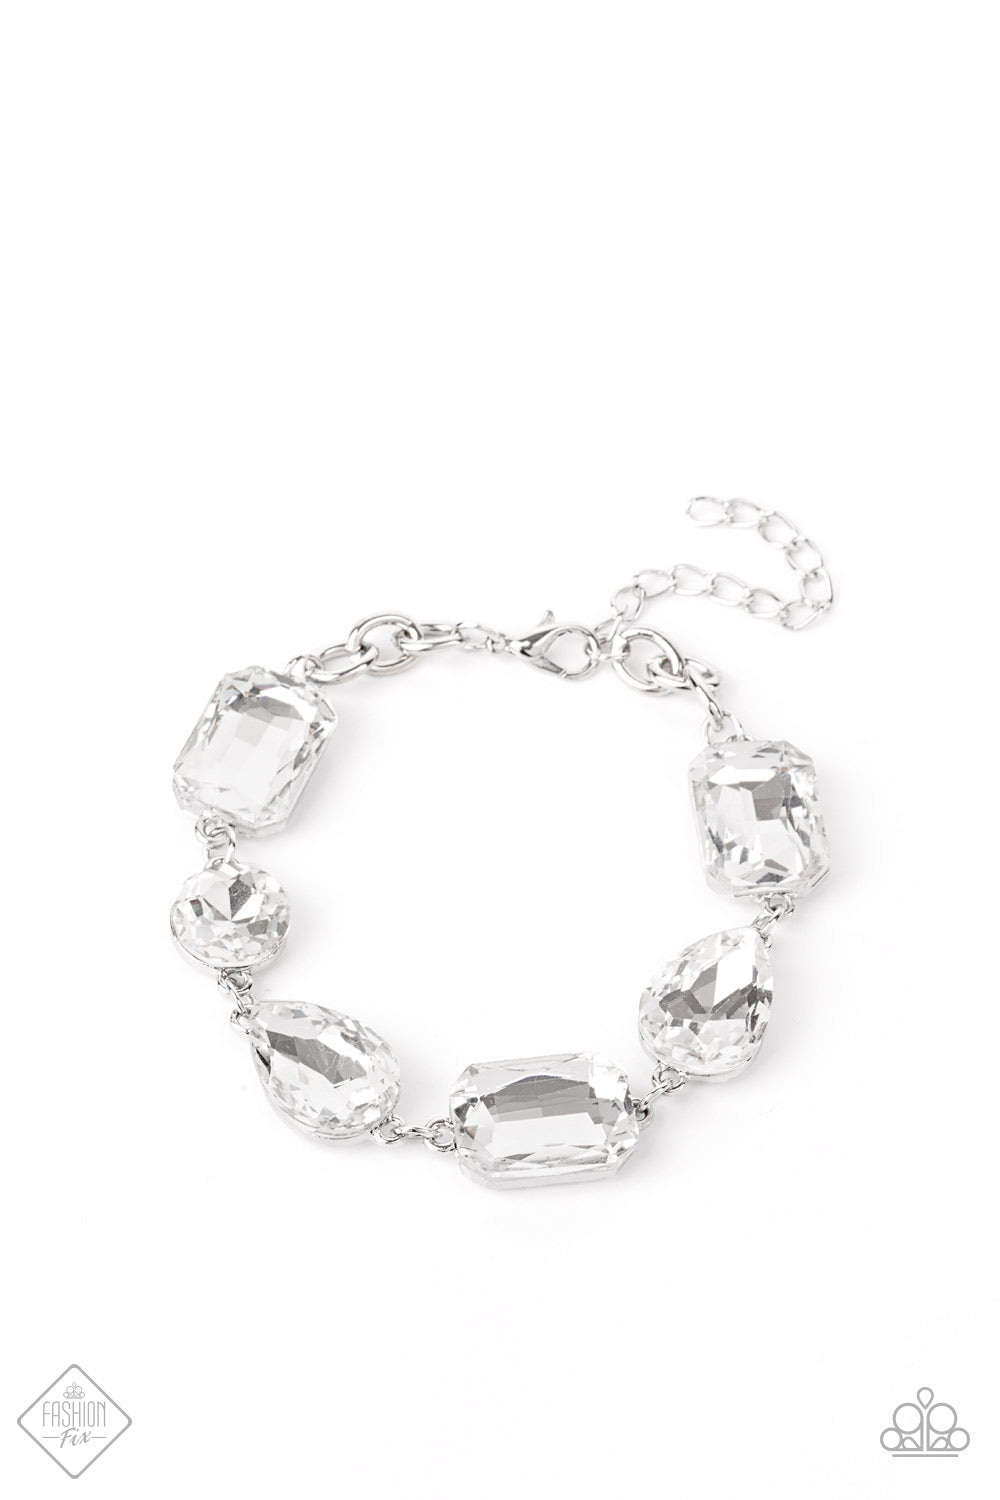 Cosmic Treasure Chest - White and Silver Bling Bracelet - Paparazzi Accessories - A collection of oversized round, teardrop, and emerald cut rhinestones delicately link around the wrist, creating a blinding statement piece. Features an adjustable clasp closure. Sold as one individual bracelet.